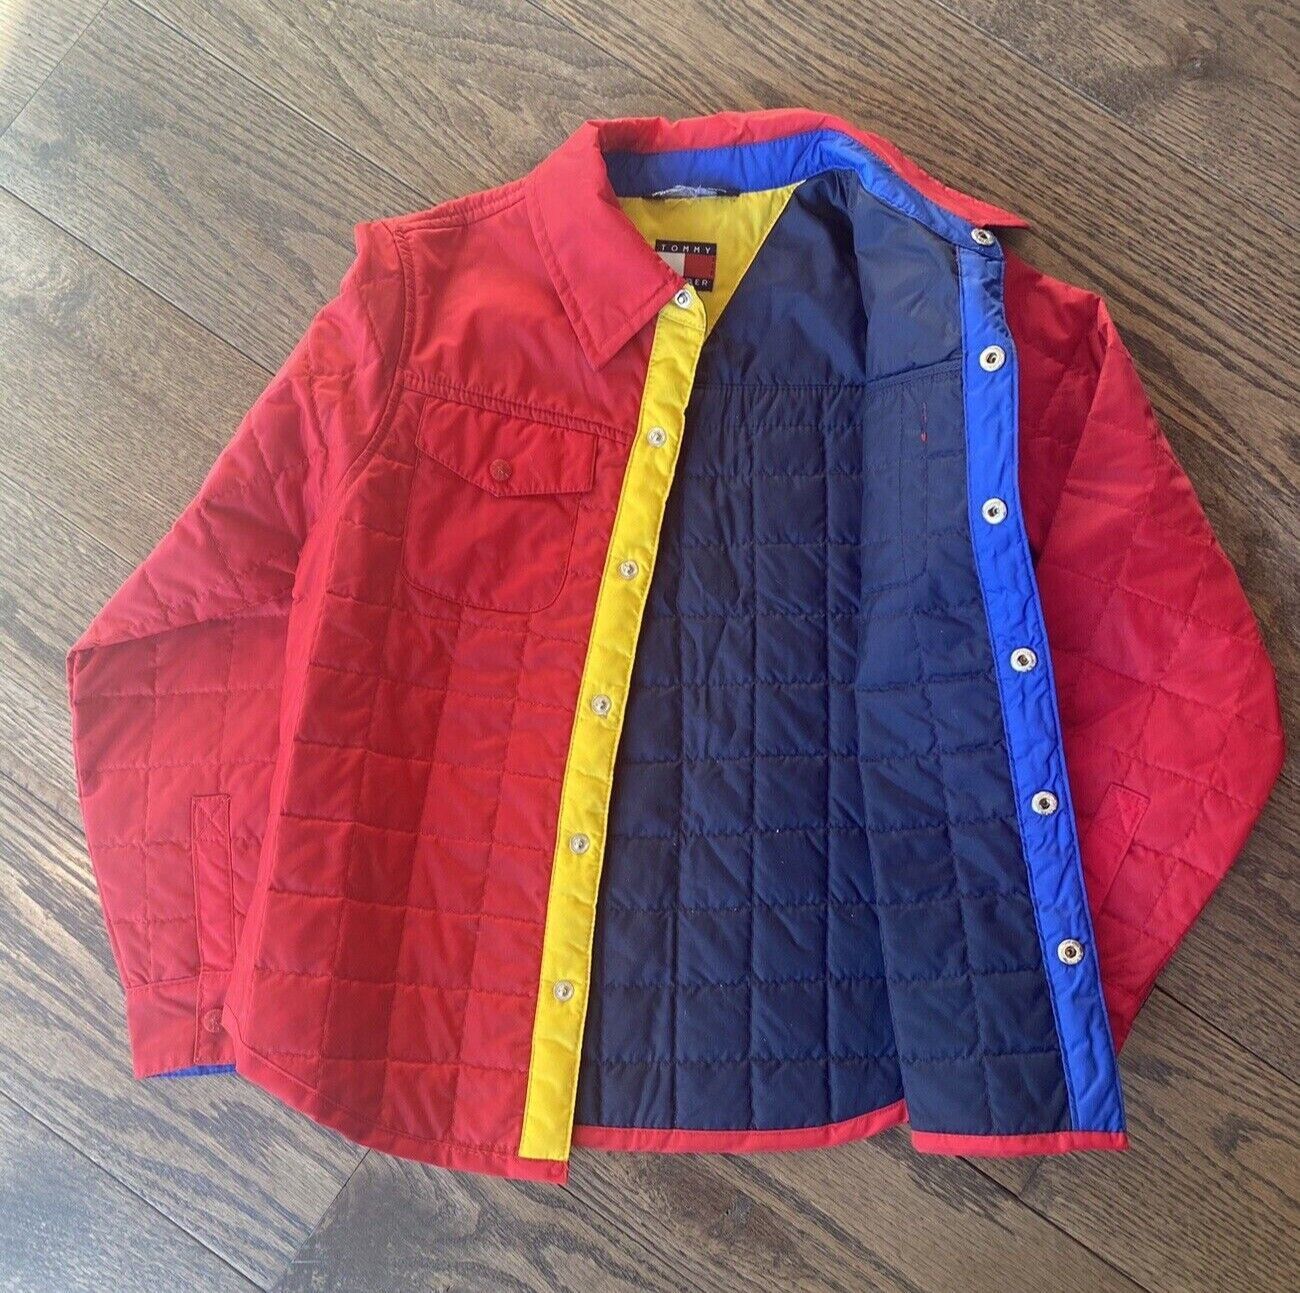 Tommy Hilfiger Boys Coat Size Small Quilted Red Jacket  90s 1990s Flashback - $18.70